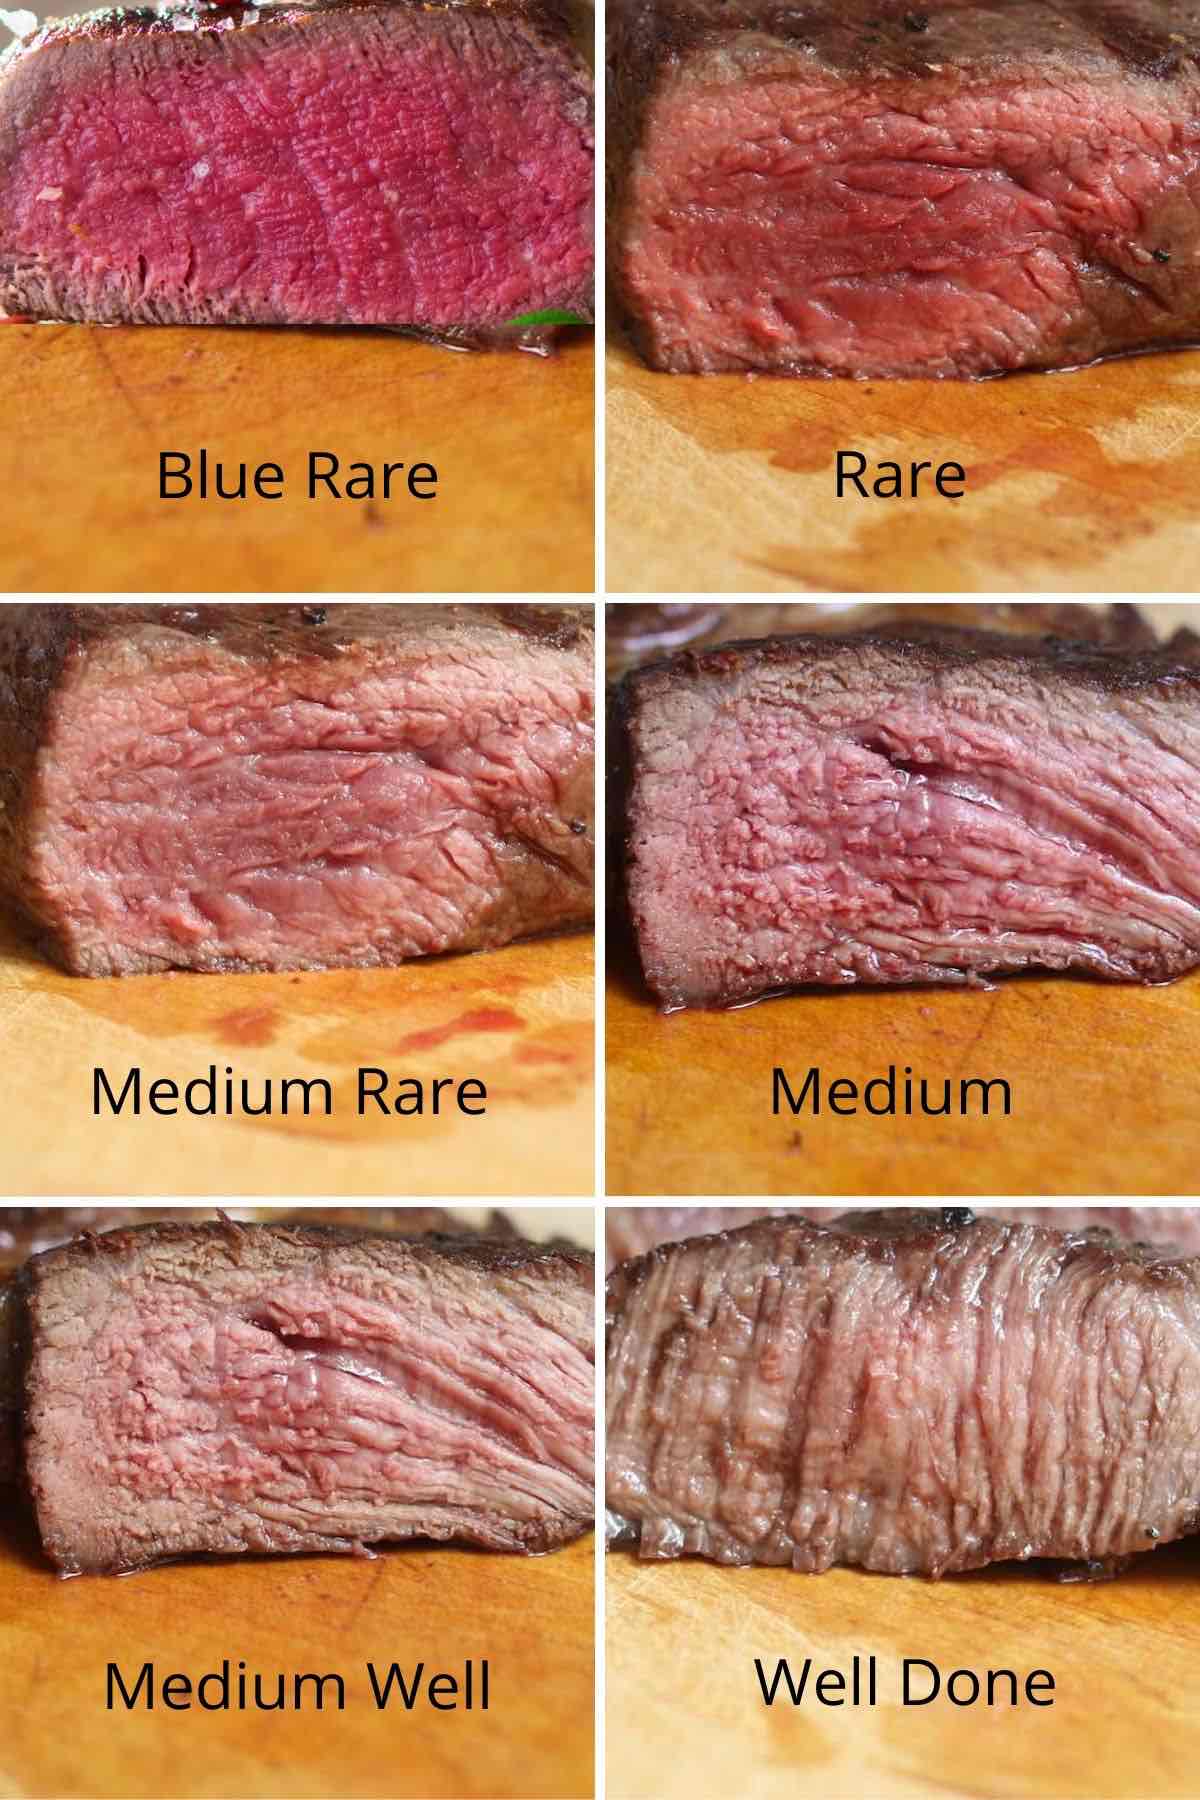 Cross sectional view of the main degrees of steak doneness including blue rare, rare, medium rare, medium, medium well and well done